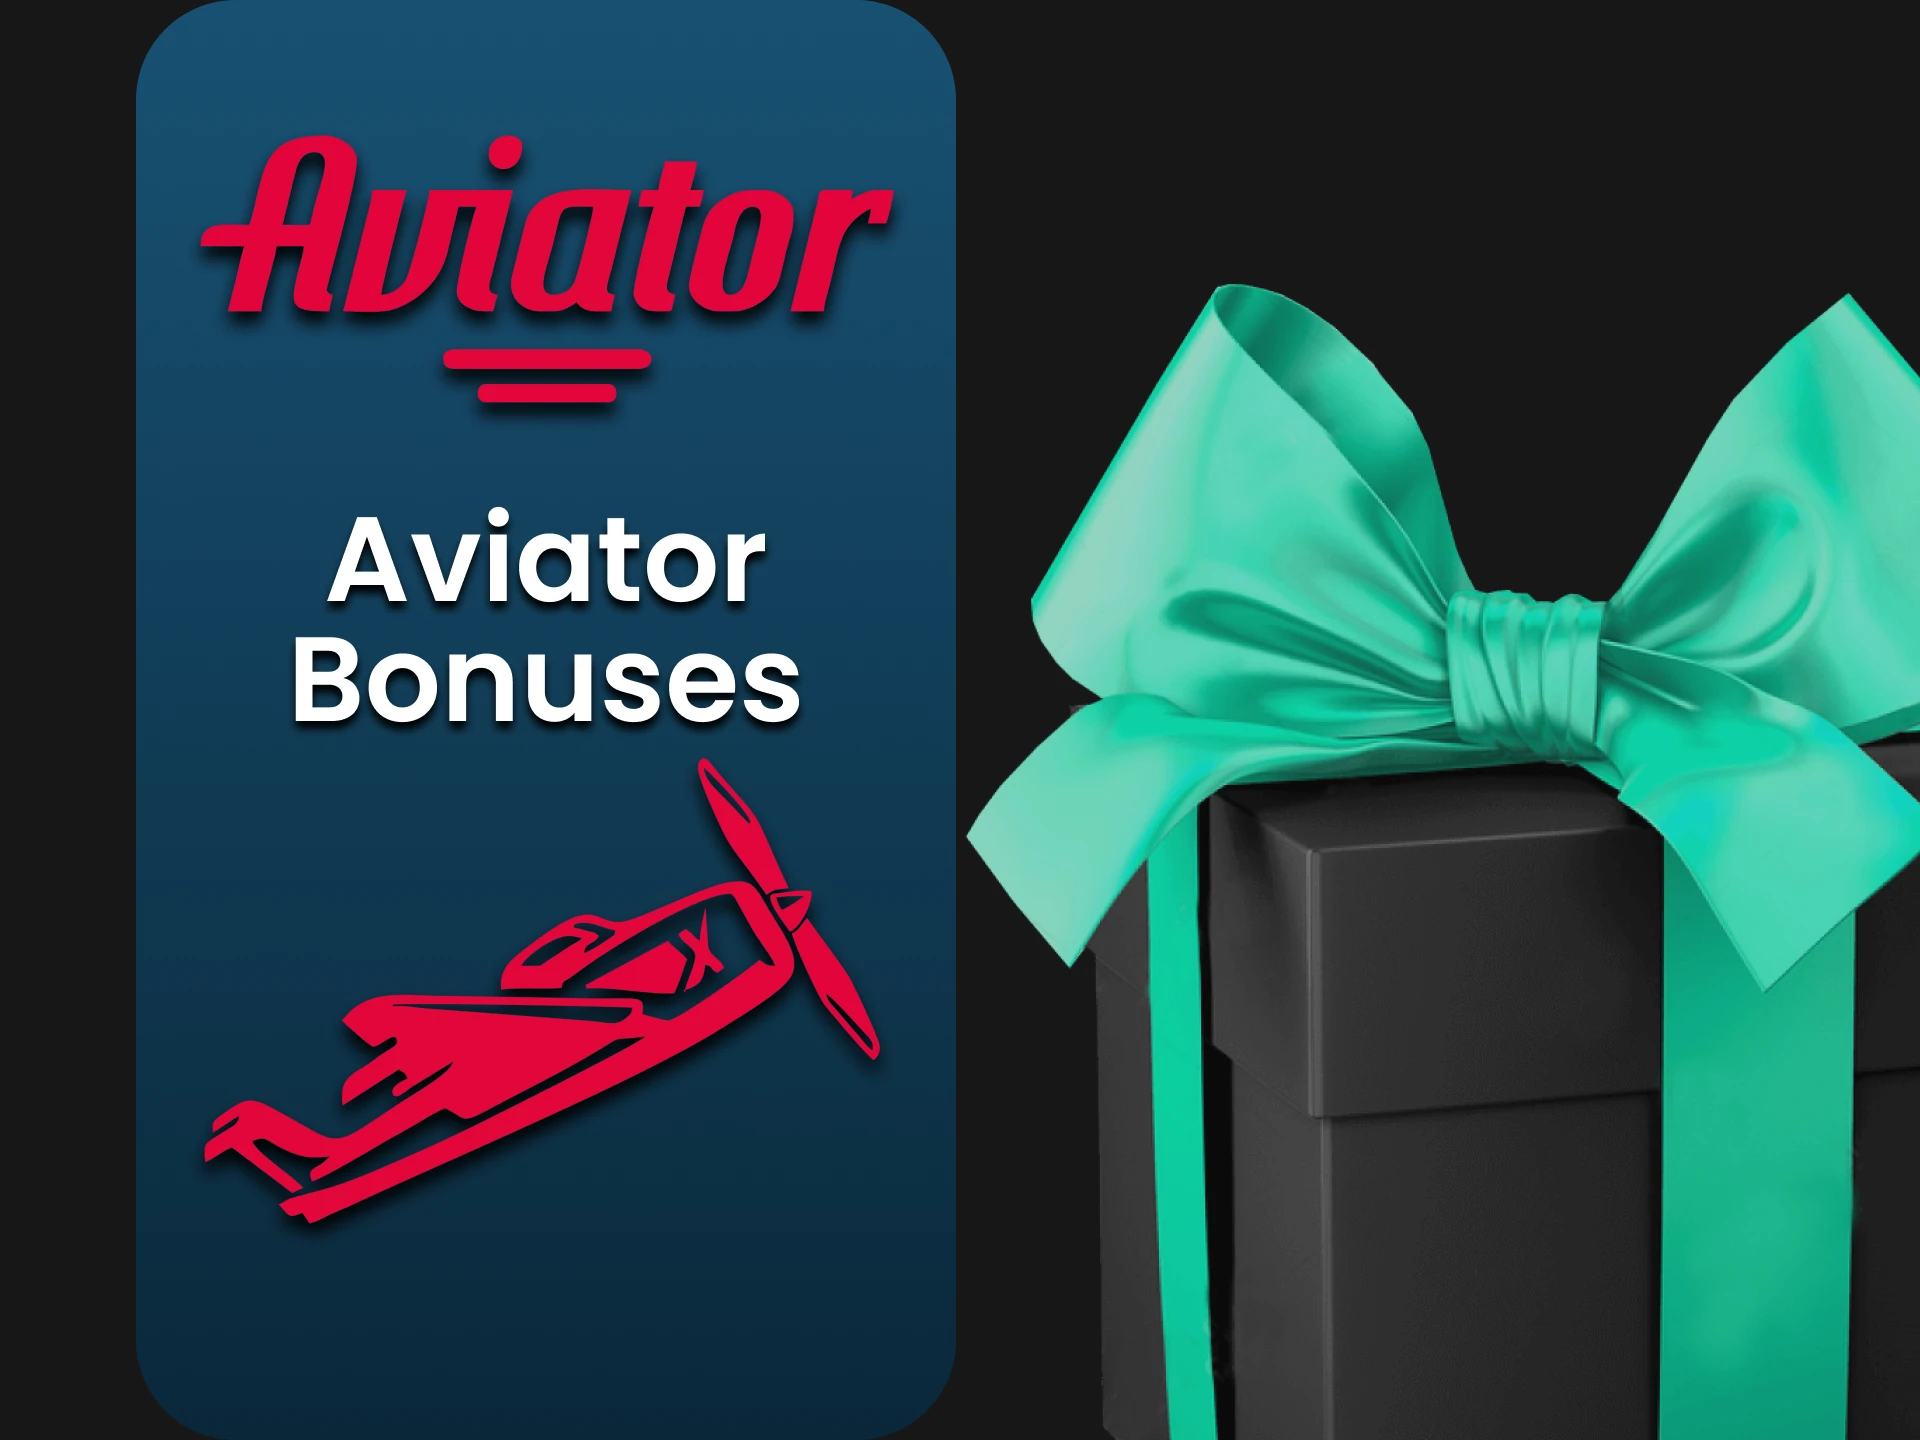 By playing Aviator you receive bonuses.